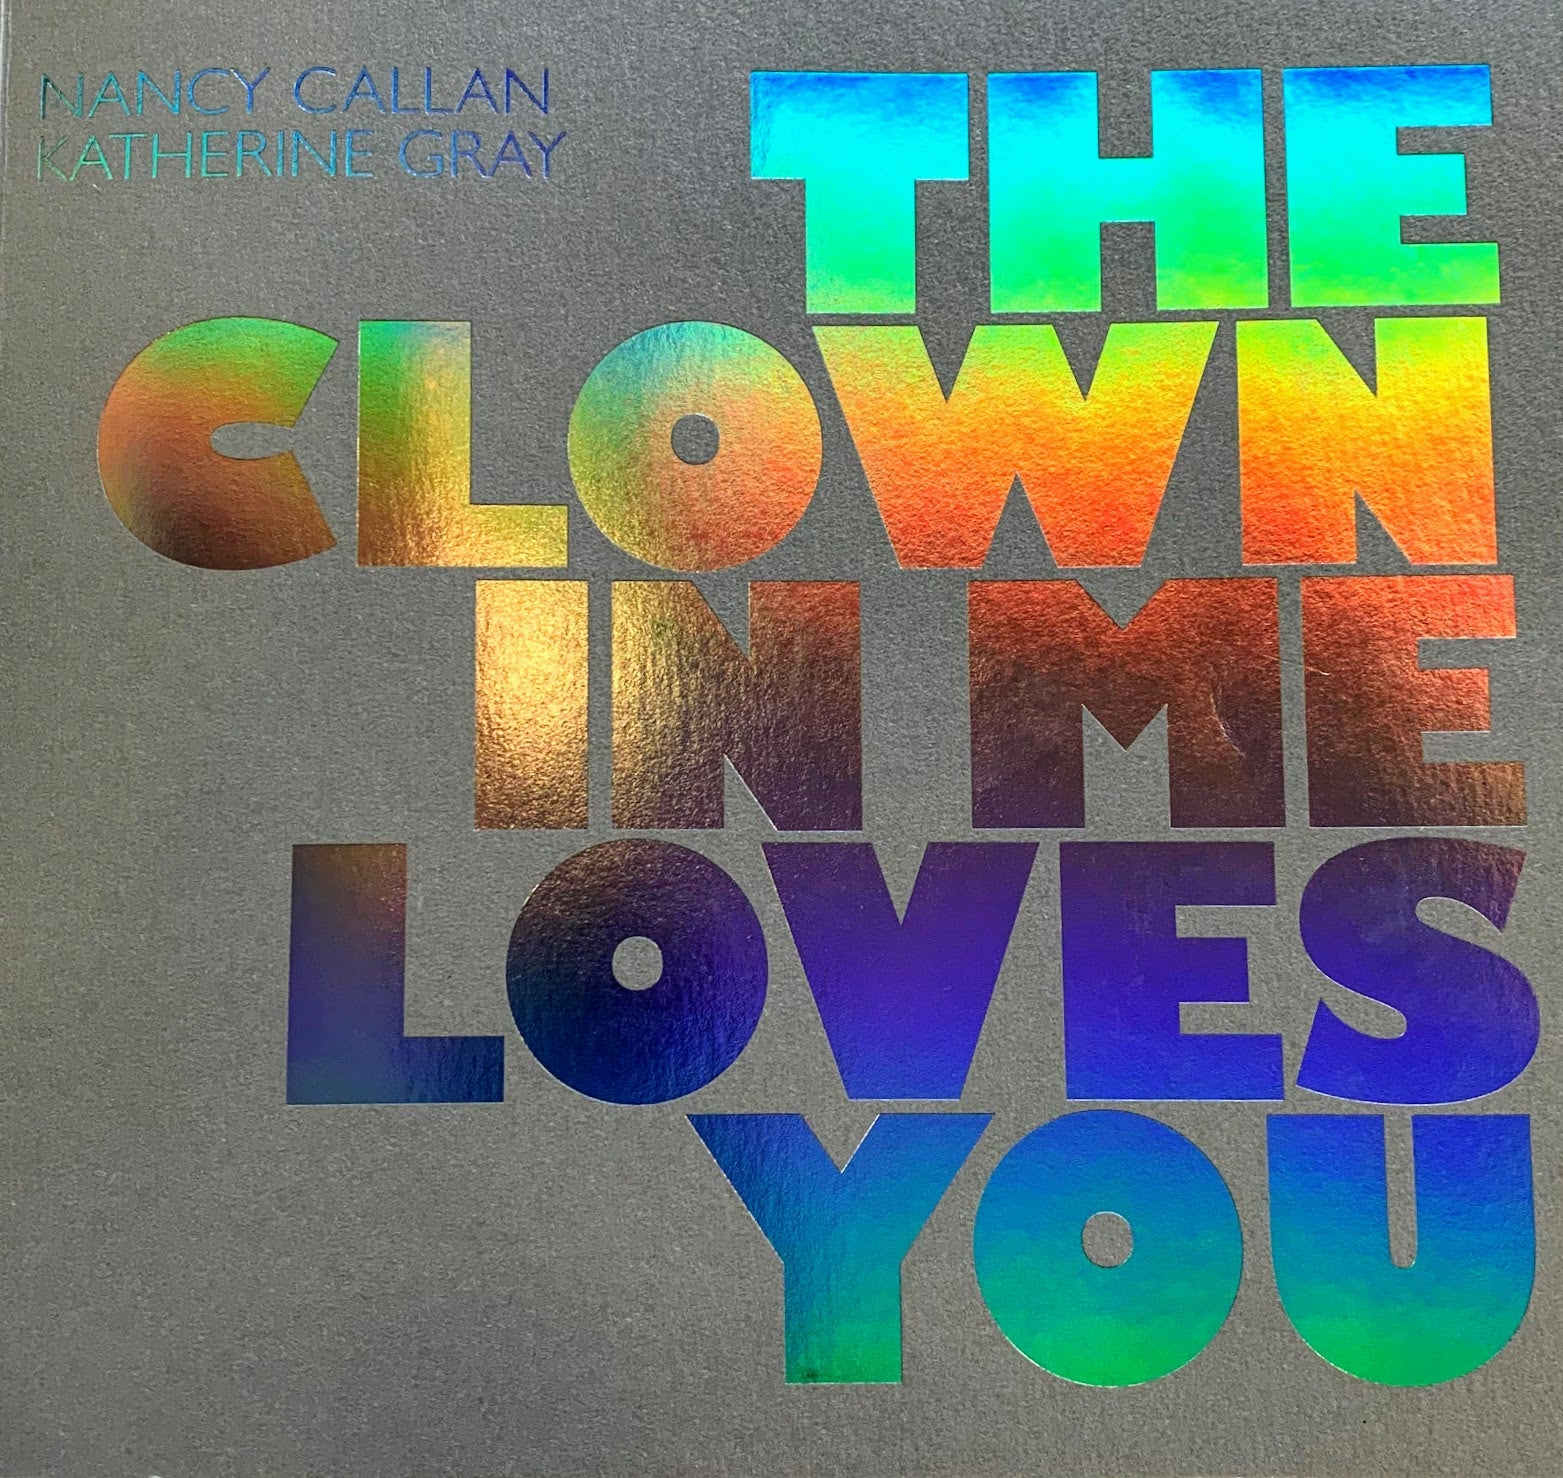 Nancy Callan and Katherine Gray: The Clown in Me Loves You